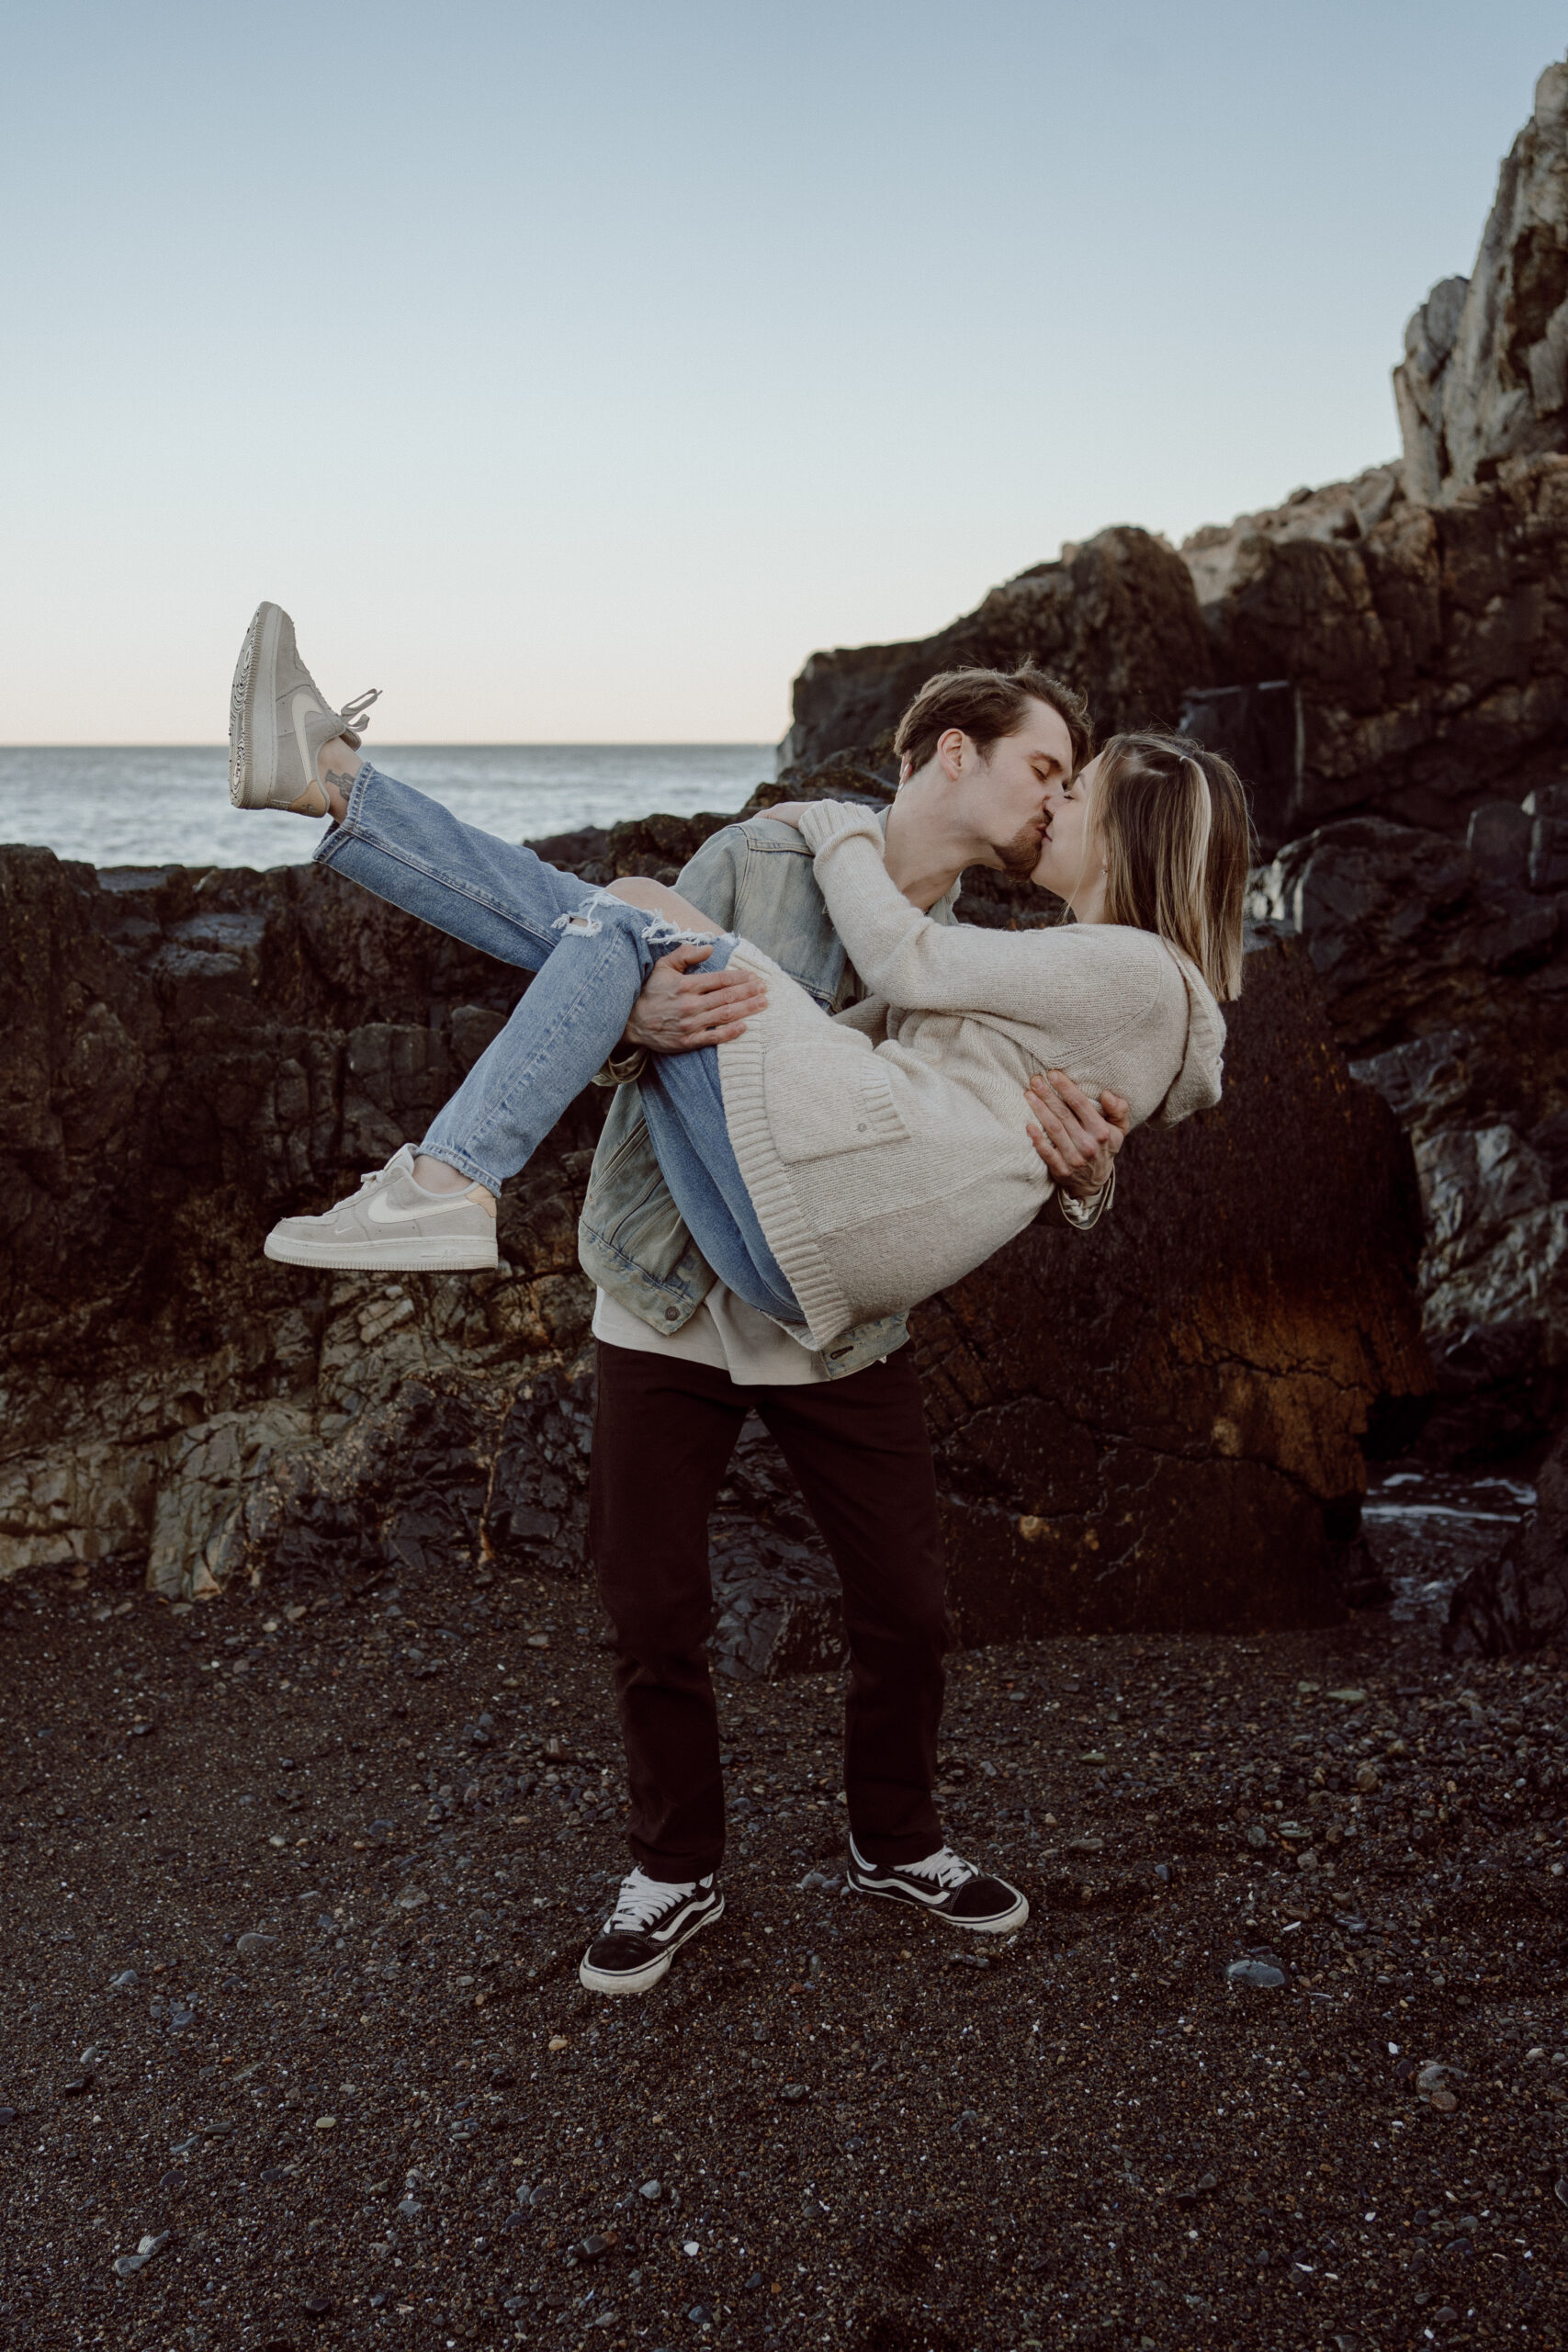 Engagement photo session at Castle Rock, Marblehead, MA: A couple embraces against the scenic backdrop of Castle Rock, with the fiancé tenderly dipping his partner into a kiss, capturing their love and joy